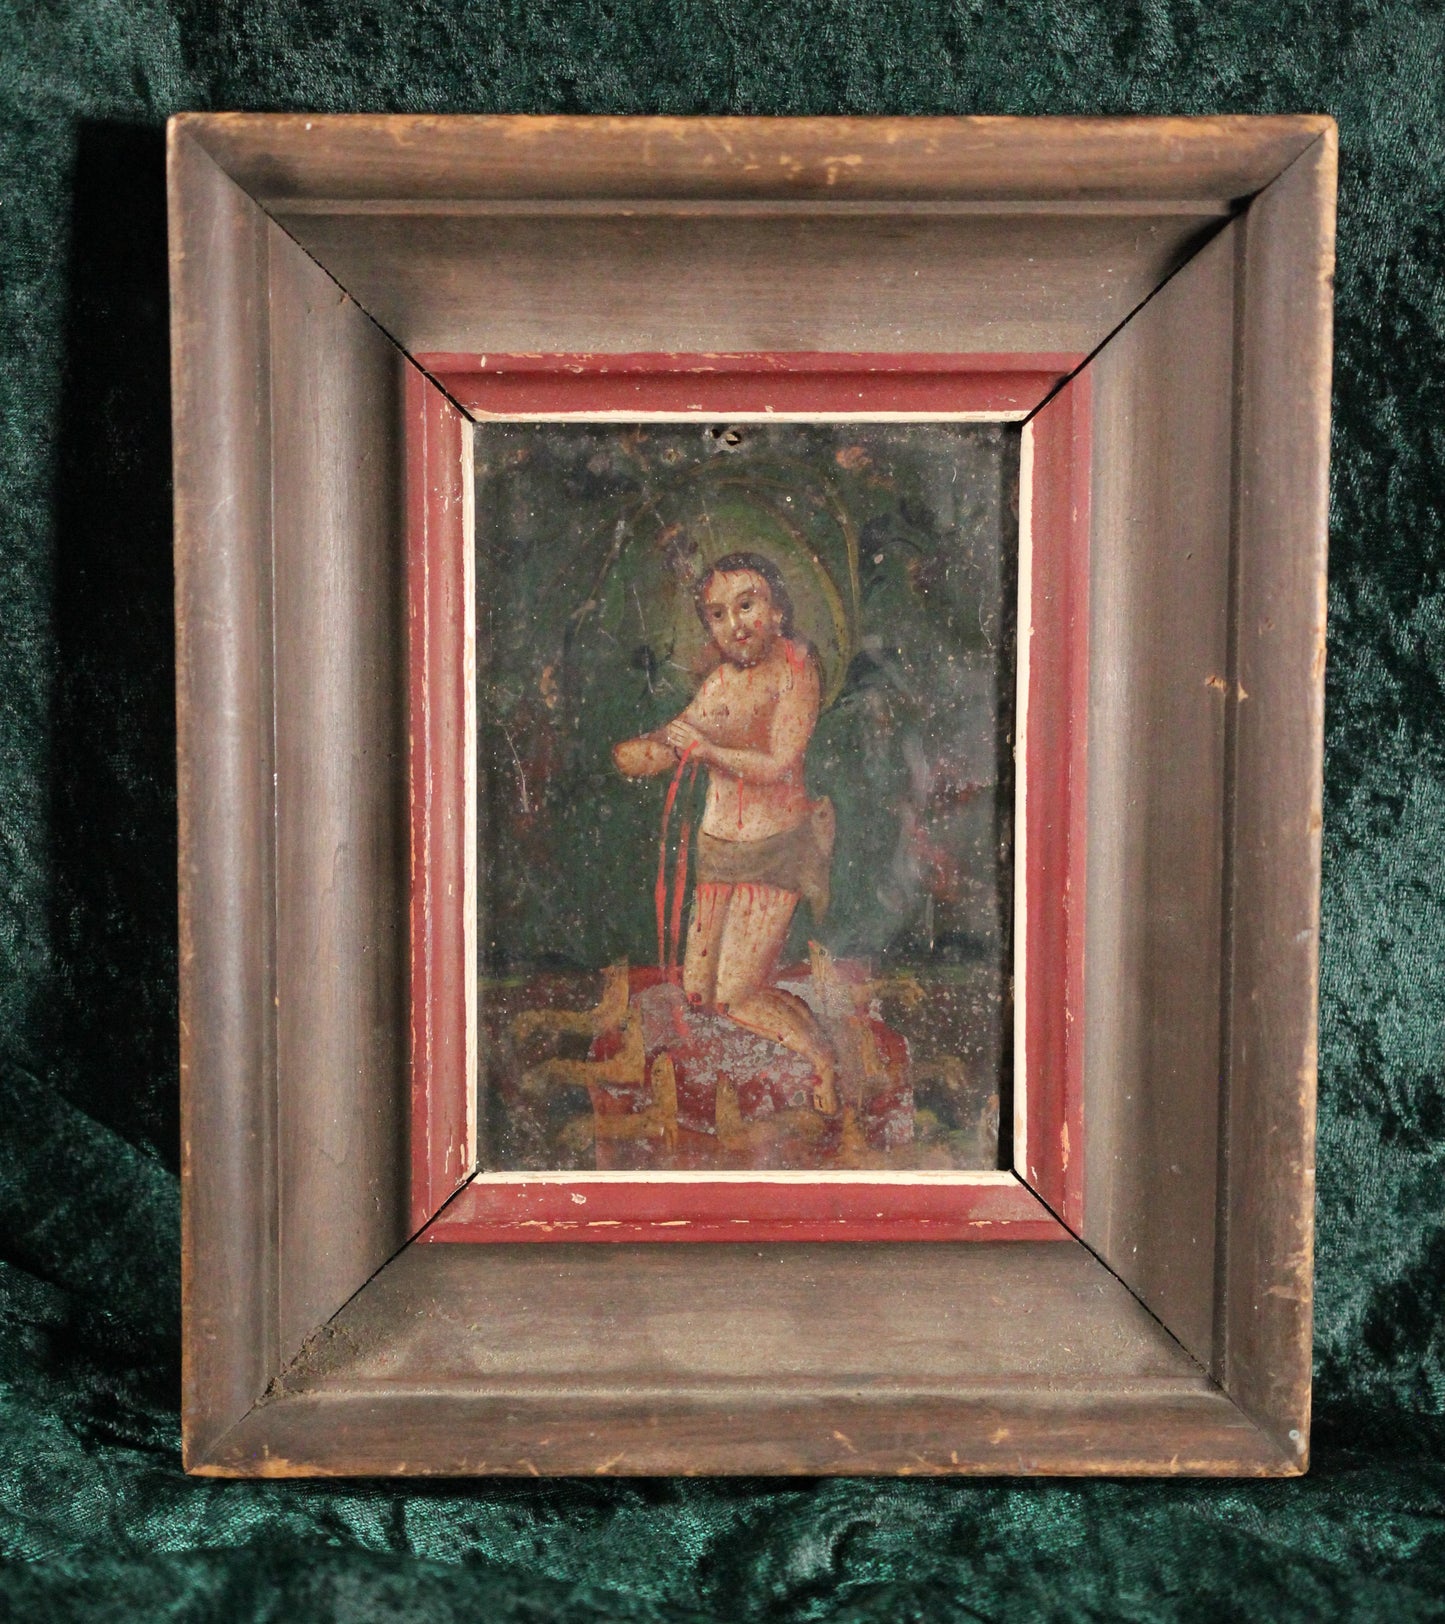 19th Century "Eucharistic Man of Sorrow" Antique Mexican Painting on Tin